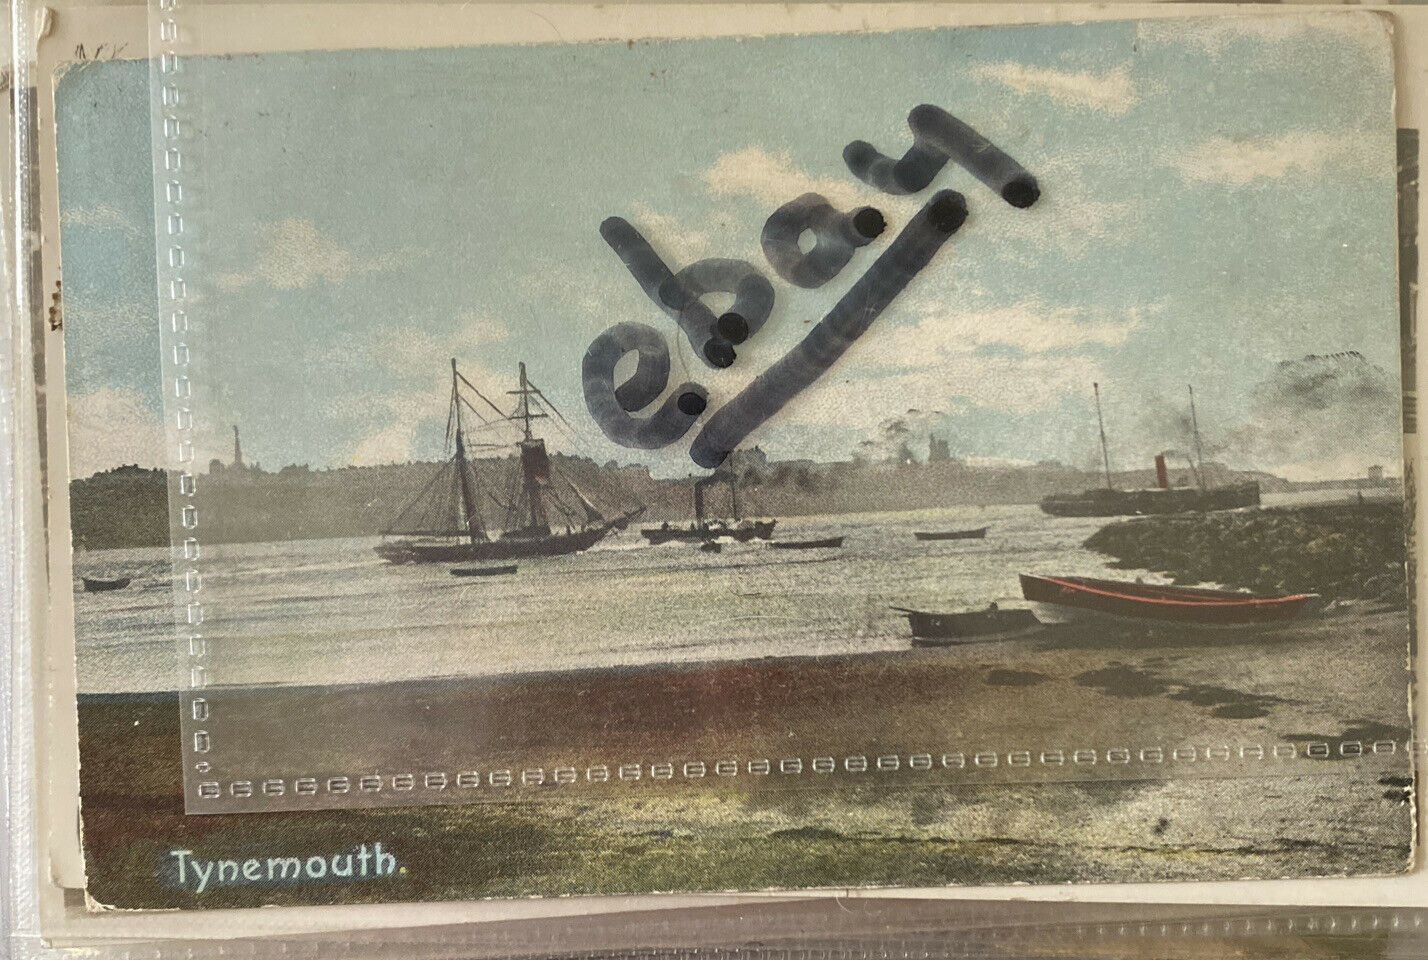 House Clearance - TYNEMOUTH VINTAGE POSTCARD POSTED 1909 OF OLD MASTED SHIPS